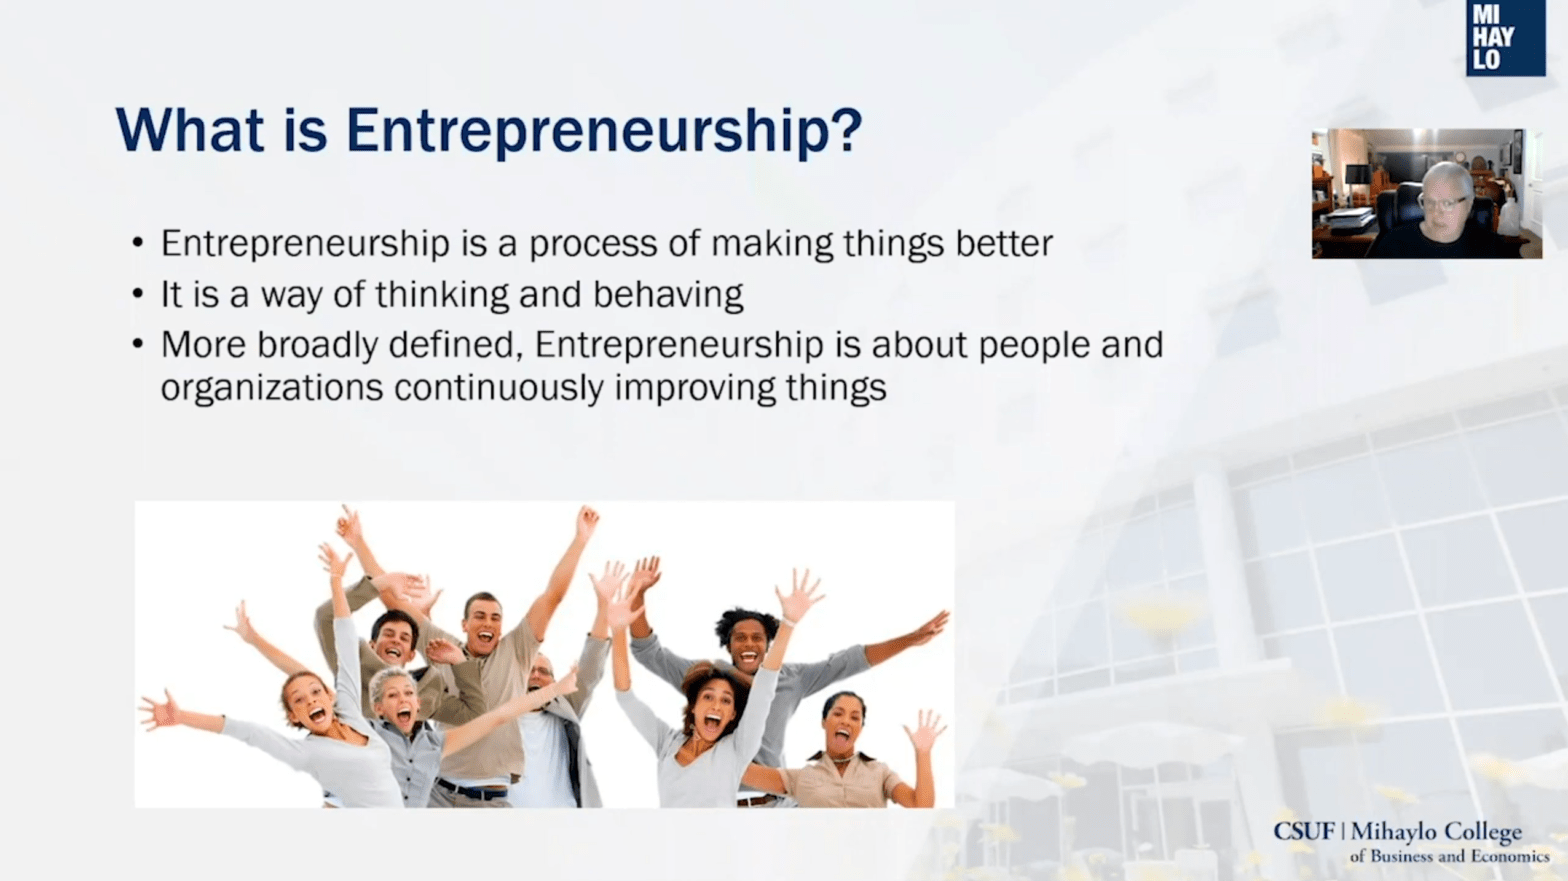 Change Your Life with a MBA in Entrepreneurship at CSUF!